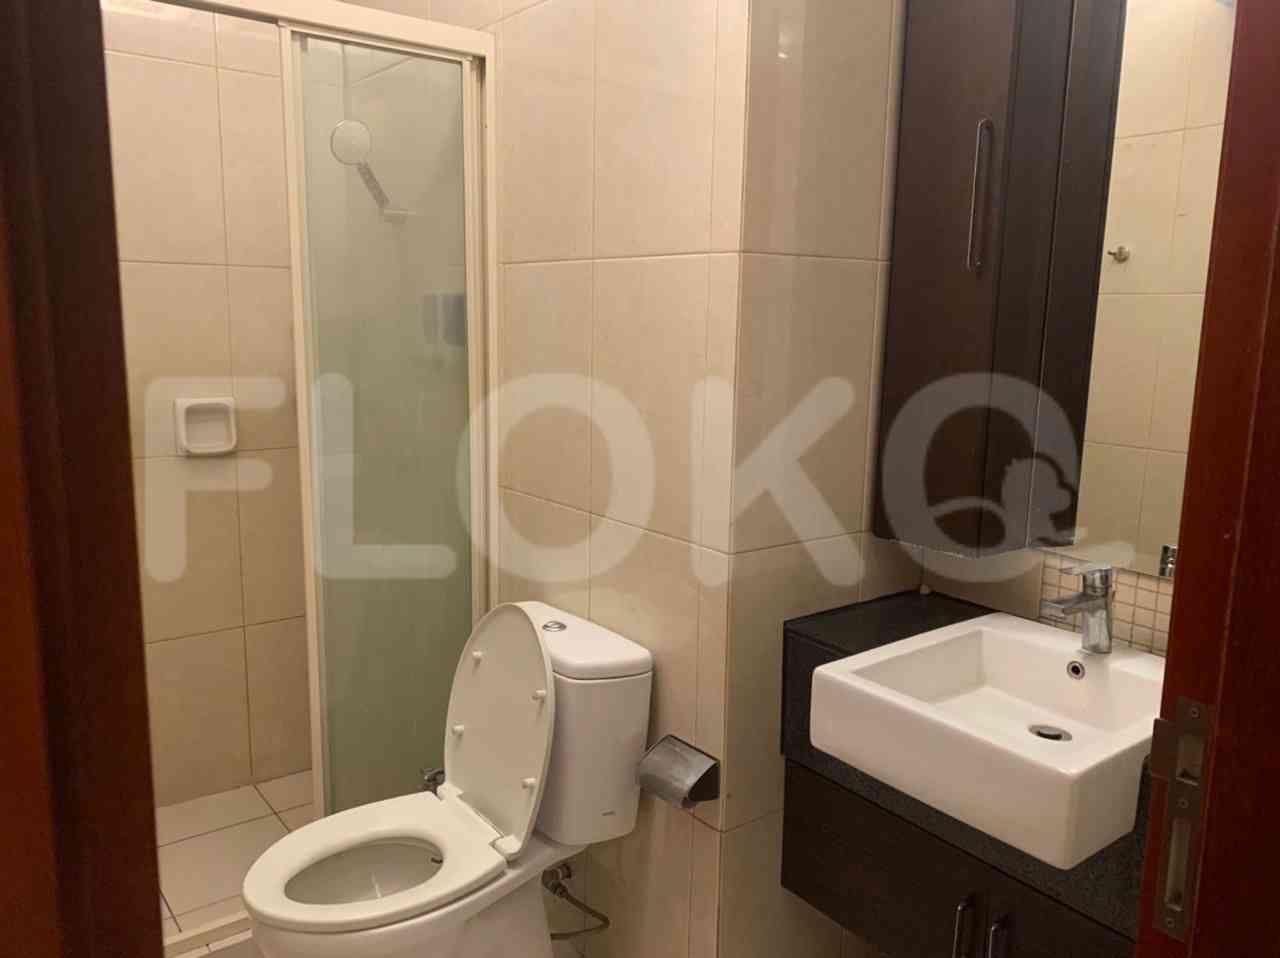 1 Bedroom on 6th Floor for Rent in Kuningan Place Apartment - fkued1 10